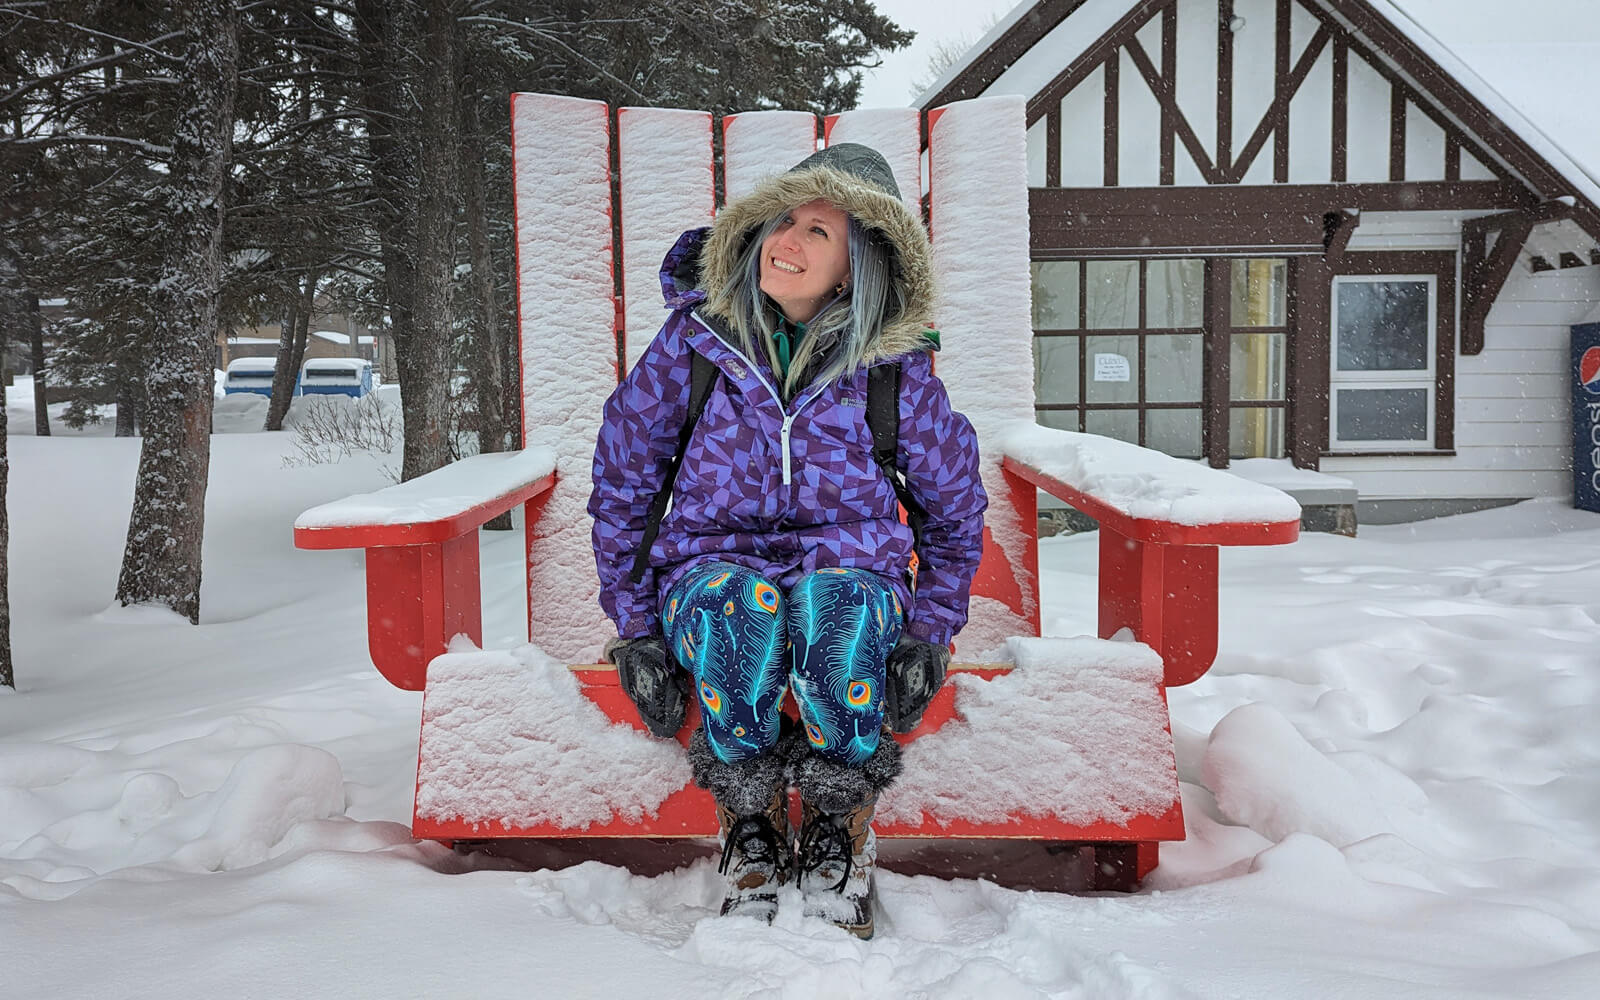 Lindsay Hanging Out in the Red Chair in Wasagaming :: I've Been Bit! Travel Blog